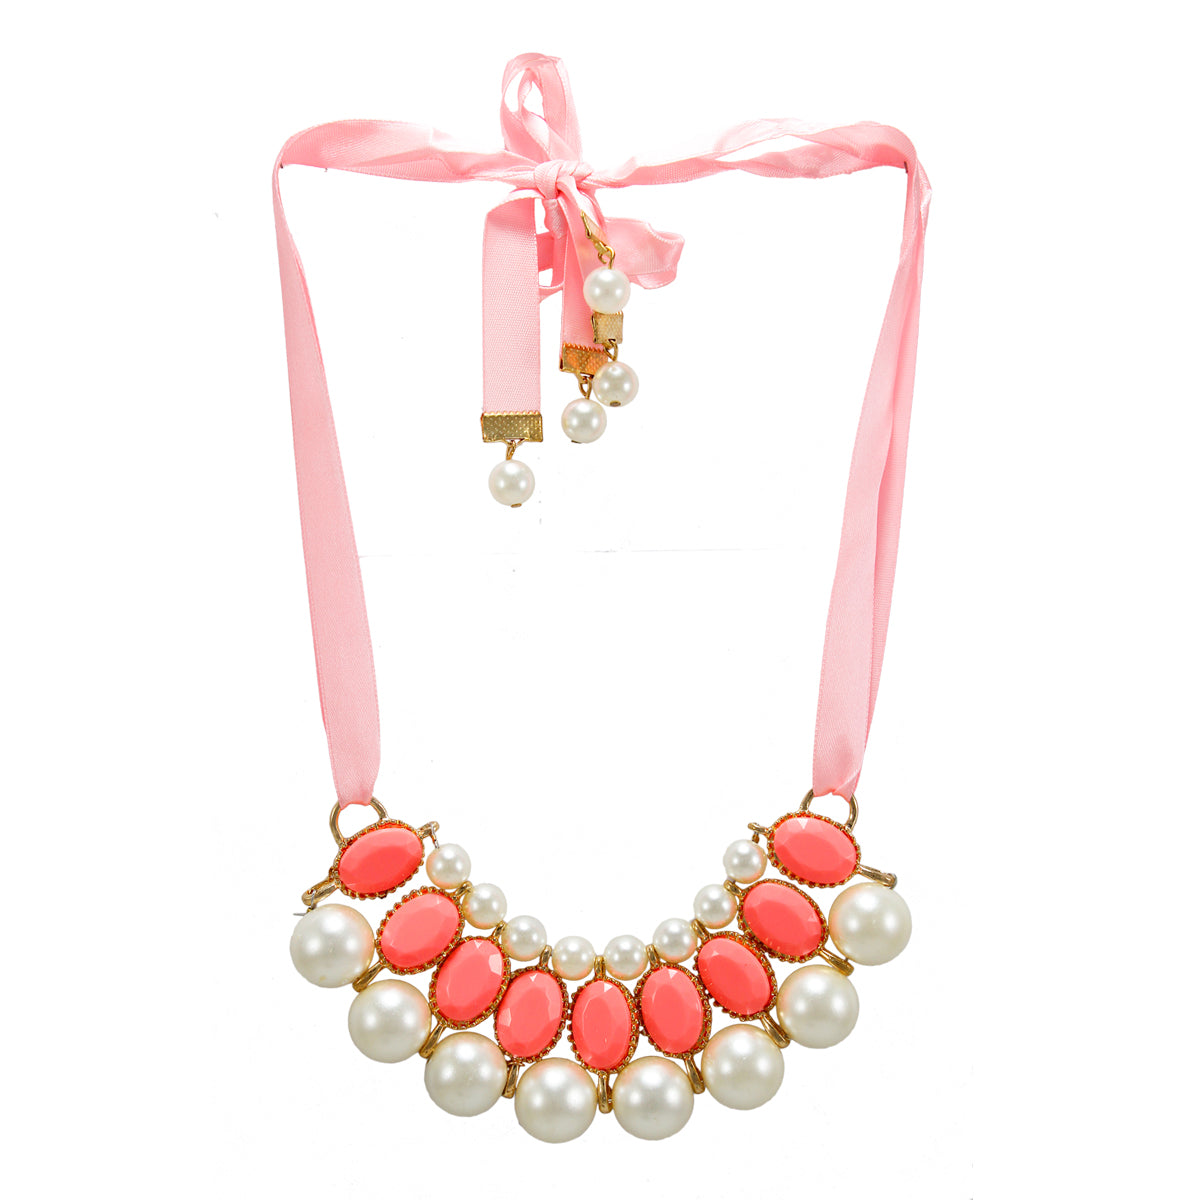 Stylish Designer Pearl Necklace with Pink Stones